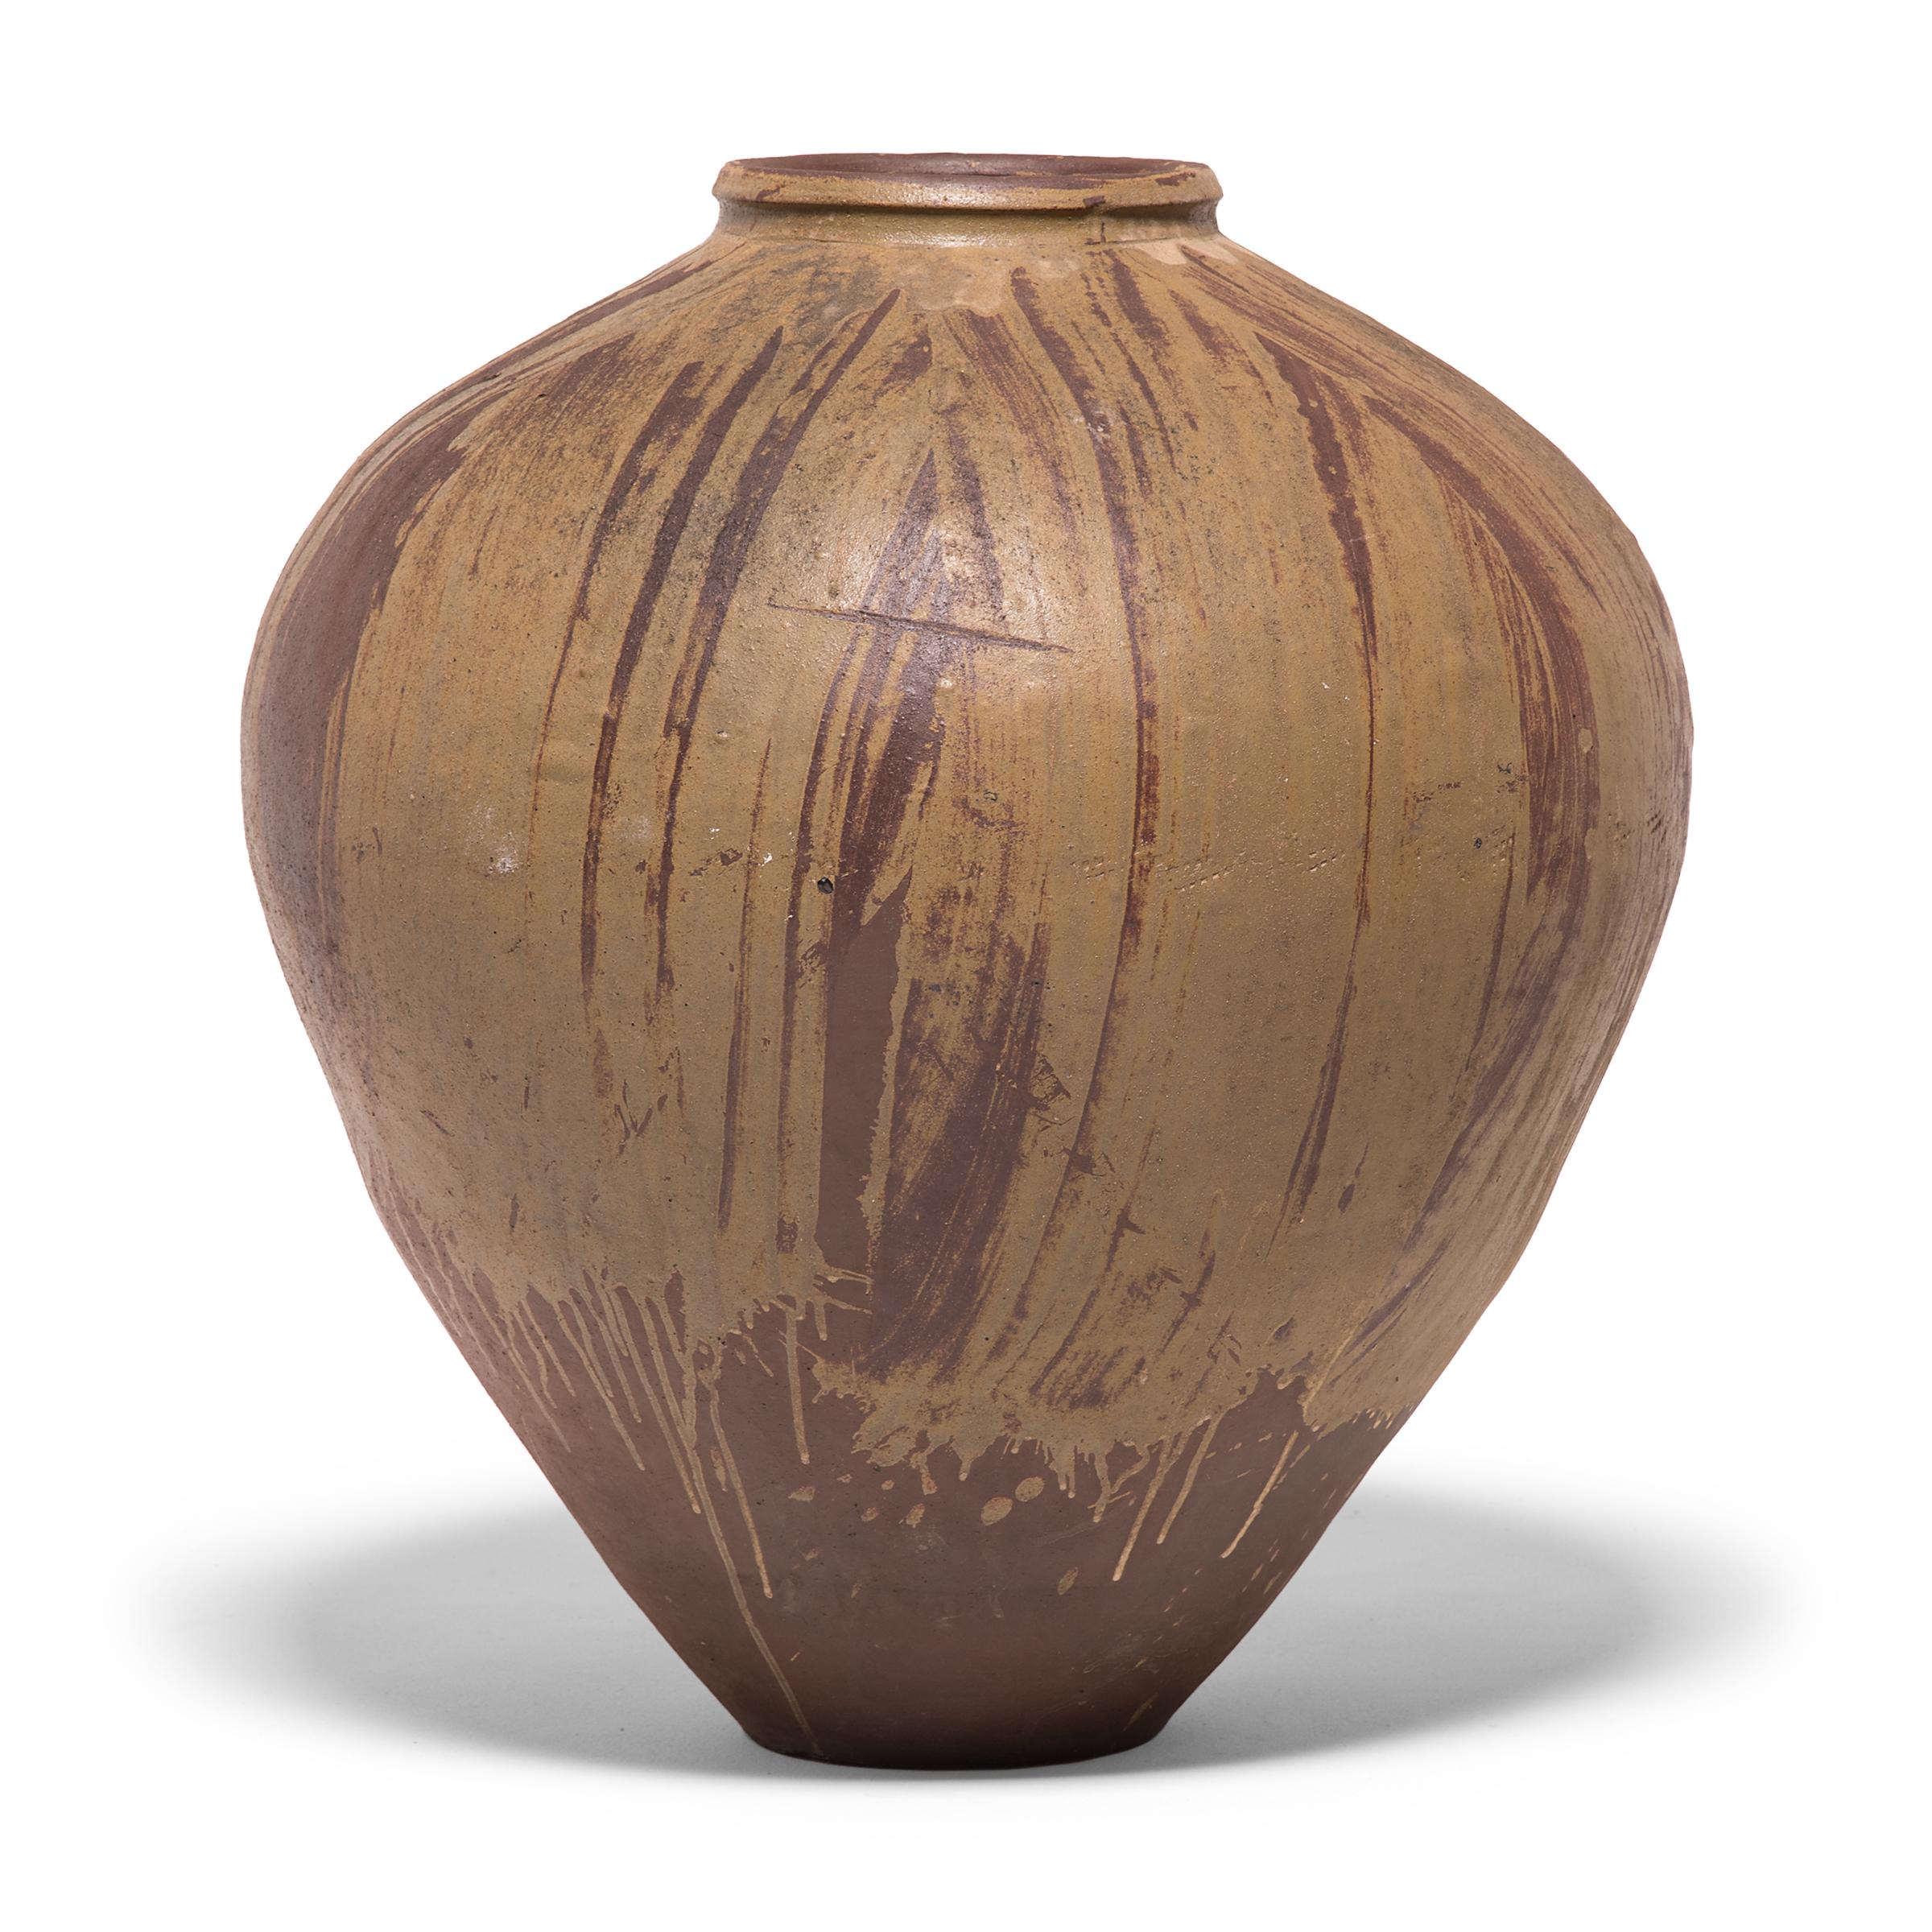 This early 20th century ceramic jar from China's Sichuan province is formed in a traditional shape meant for storing wine and spirits made from rice and grains. Applied with a loose hand, a light glaze sweeps across the jar's high shoulders, pooling